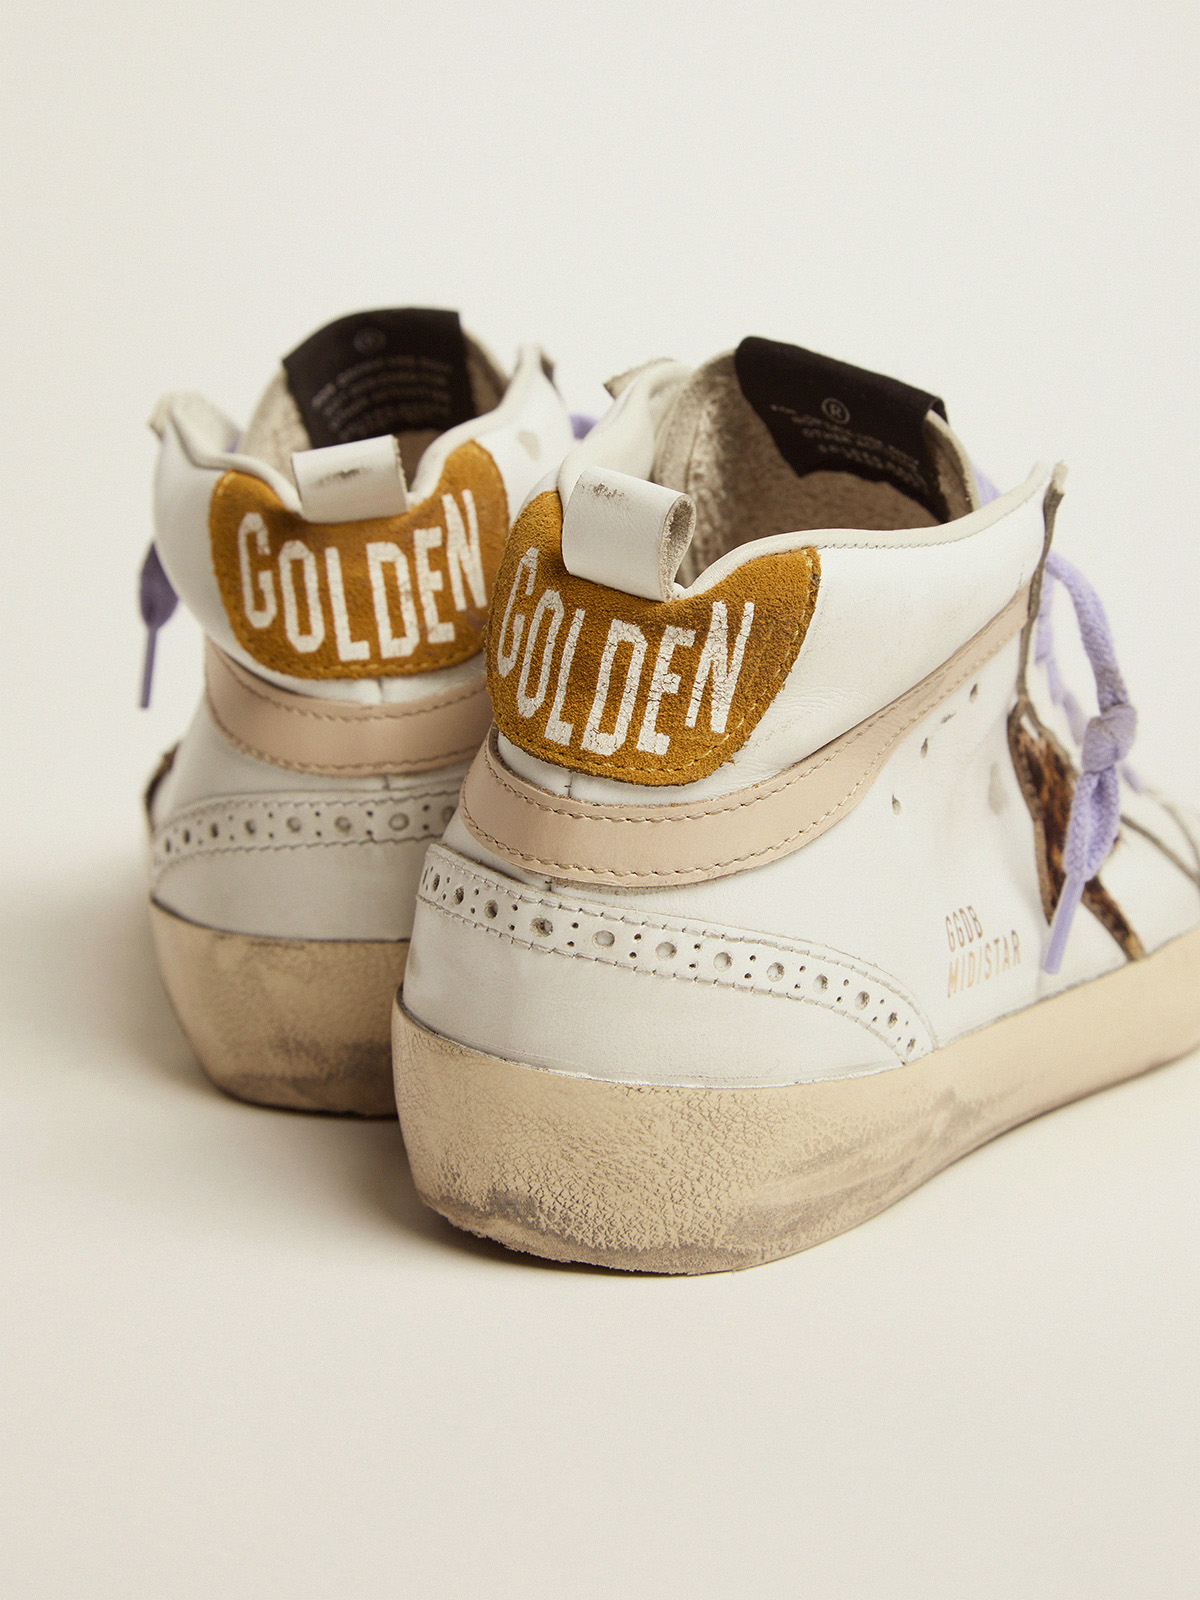 Mid Star sneakers with pony skin star and orange heel tab | Golden Goose